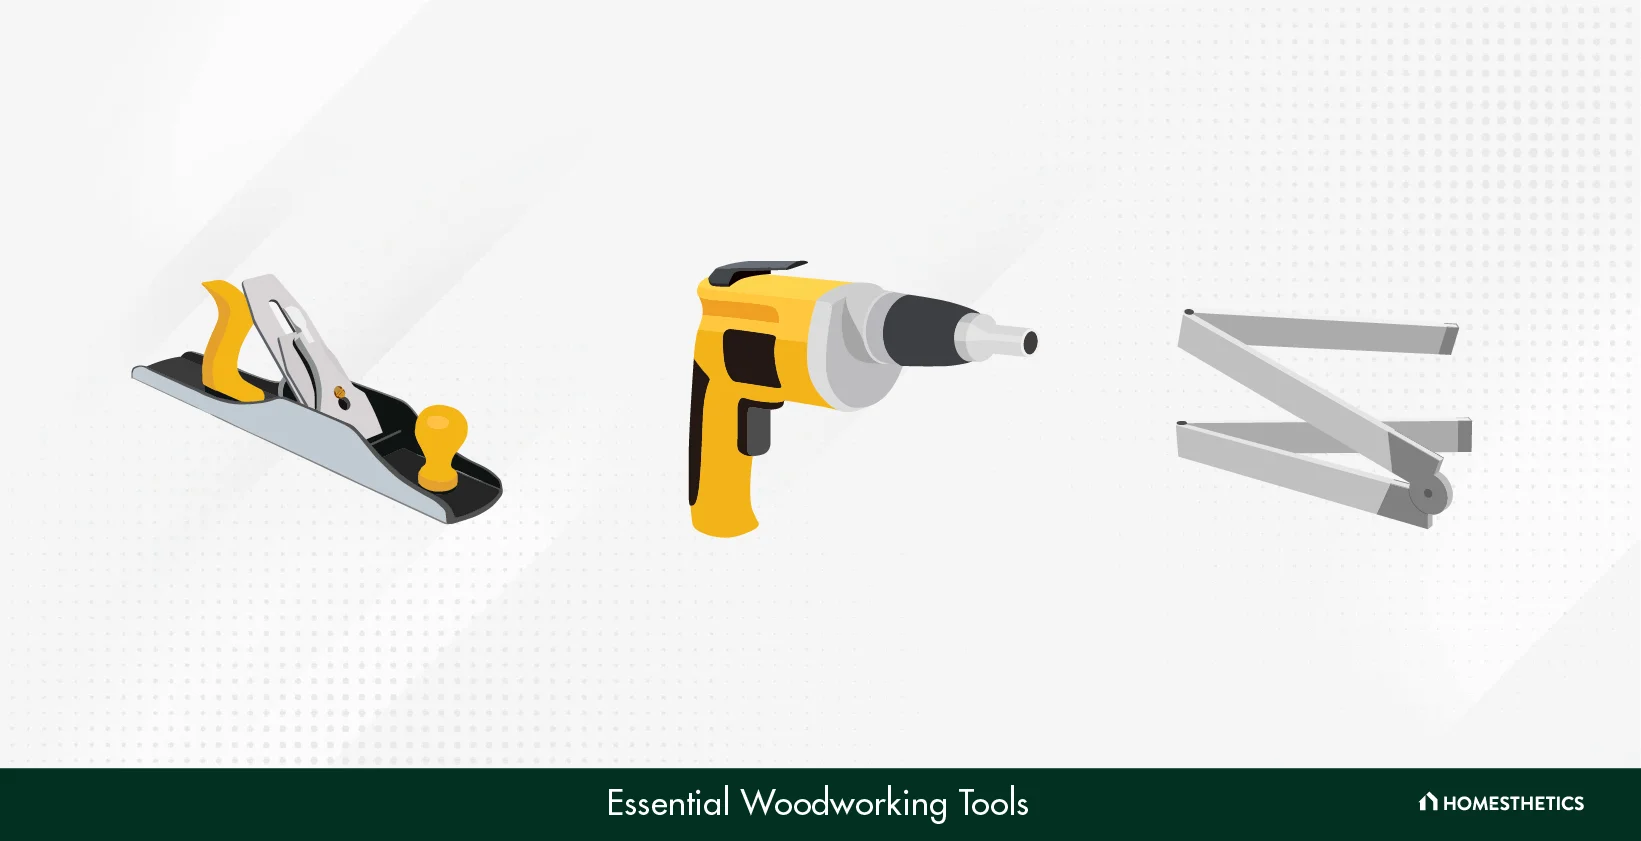 Essential Woodworking Tools